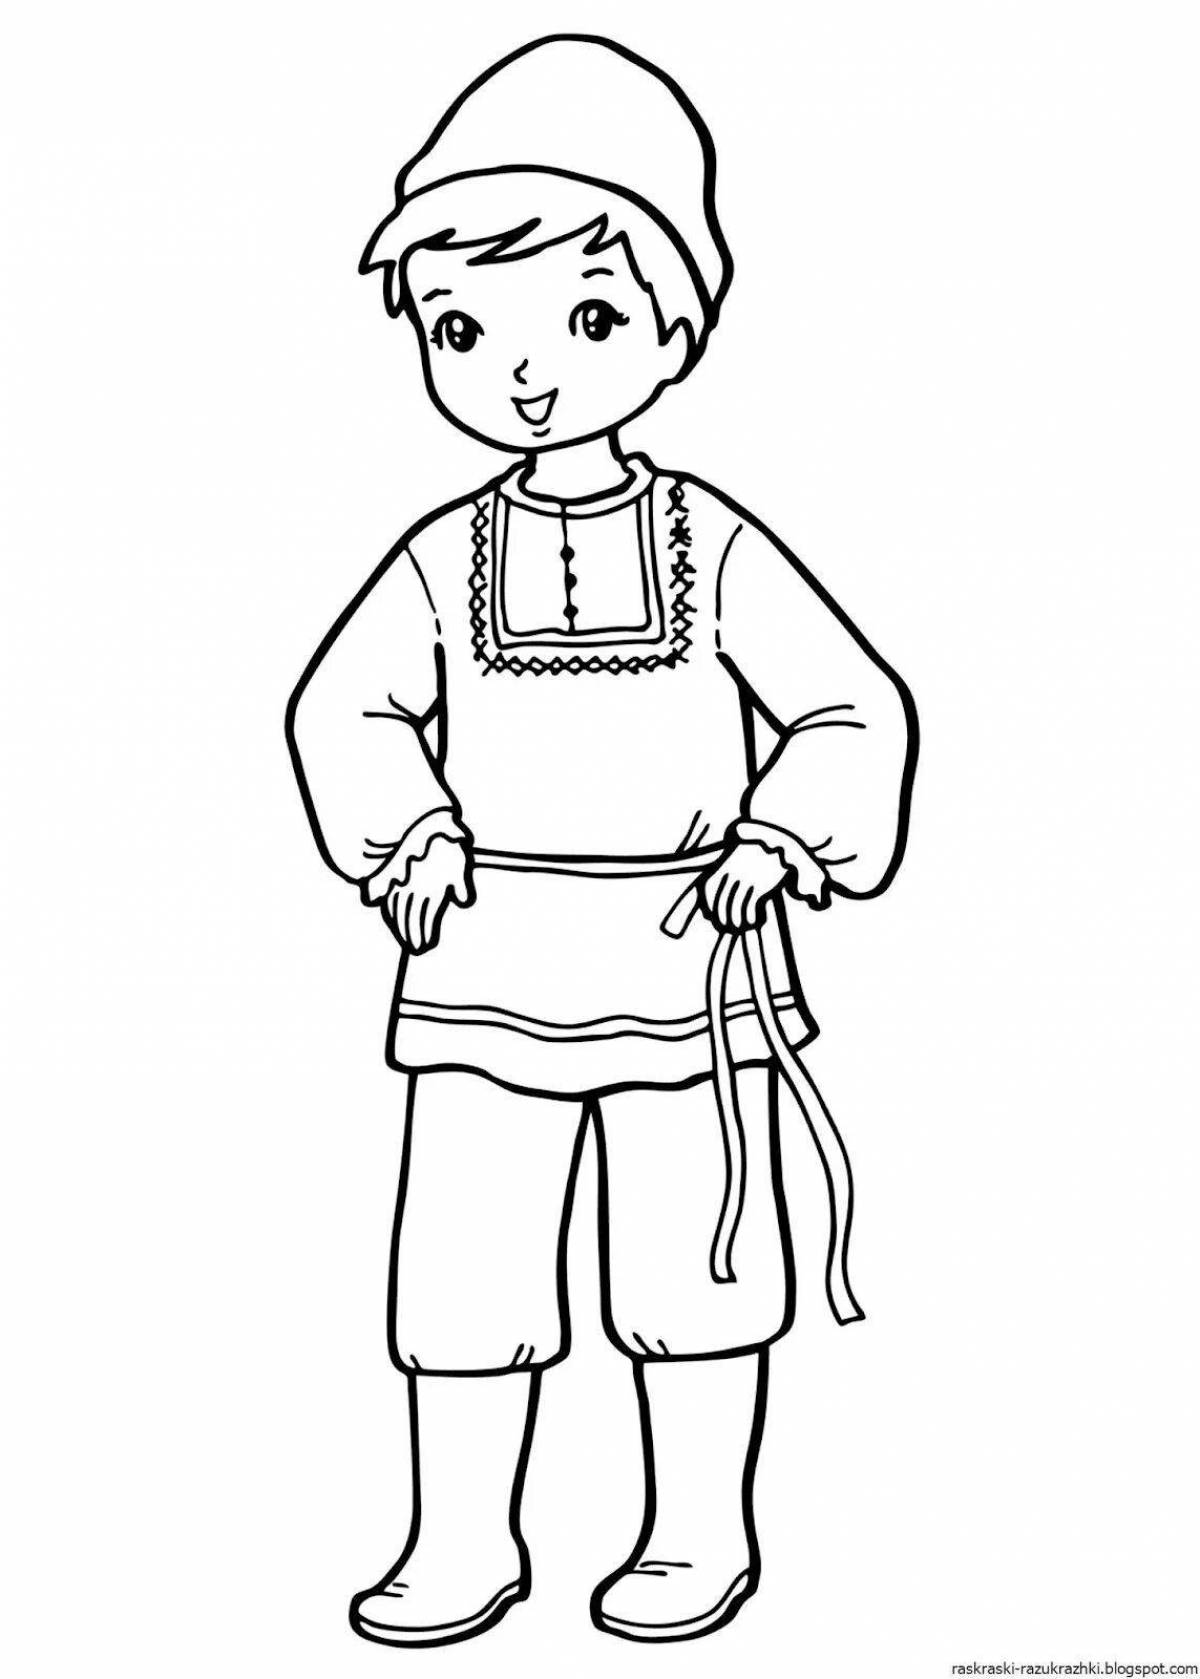 Shining Russian folk clothes coloring book for children